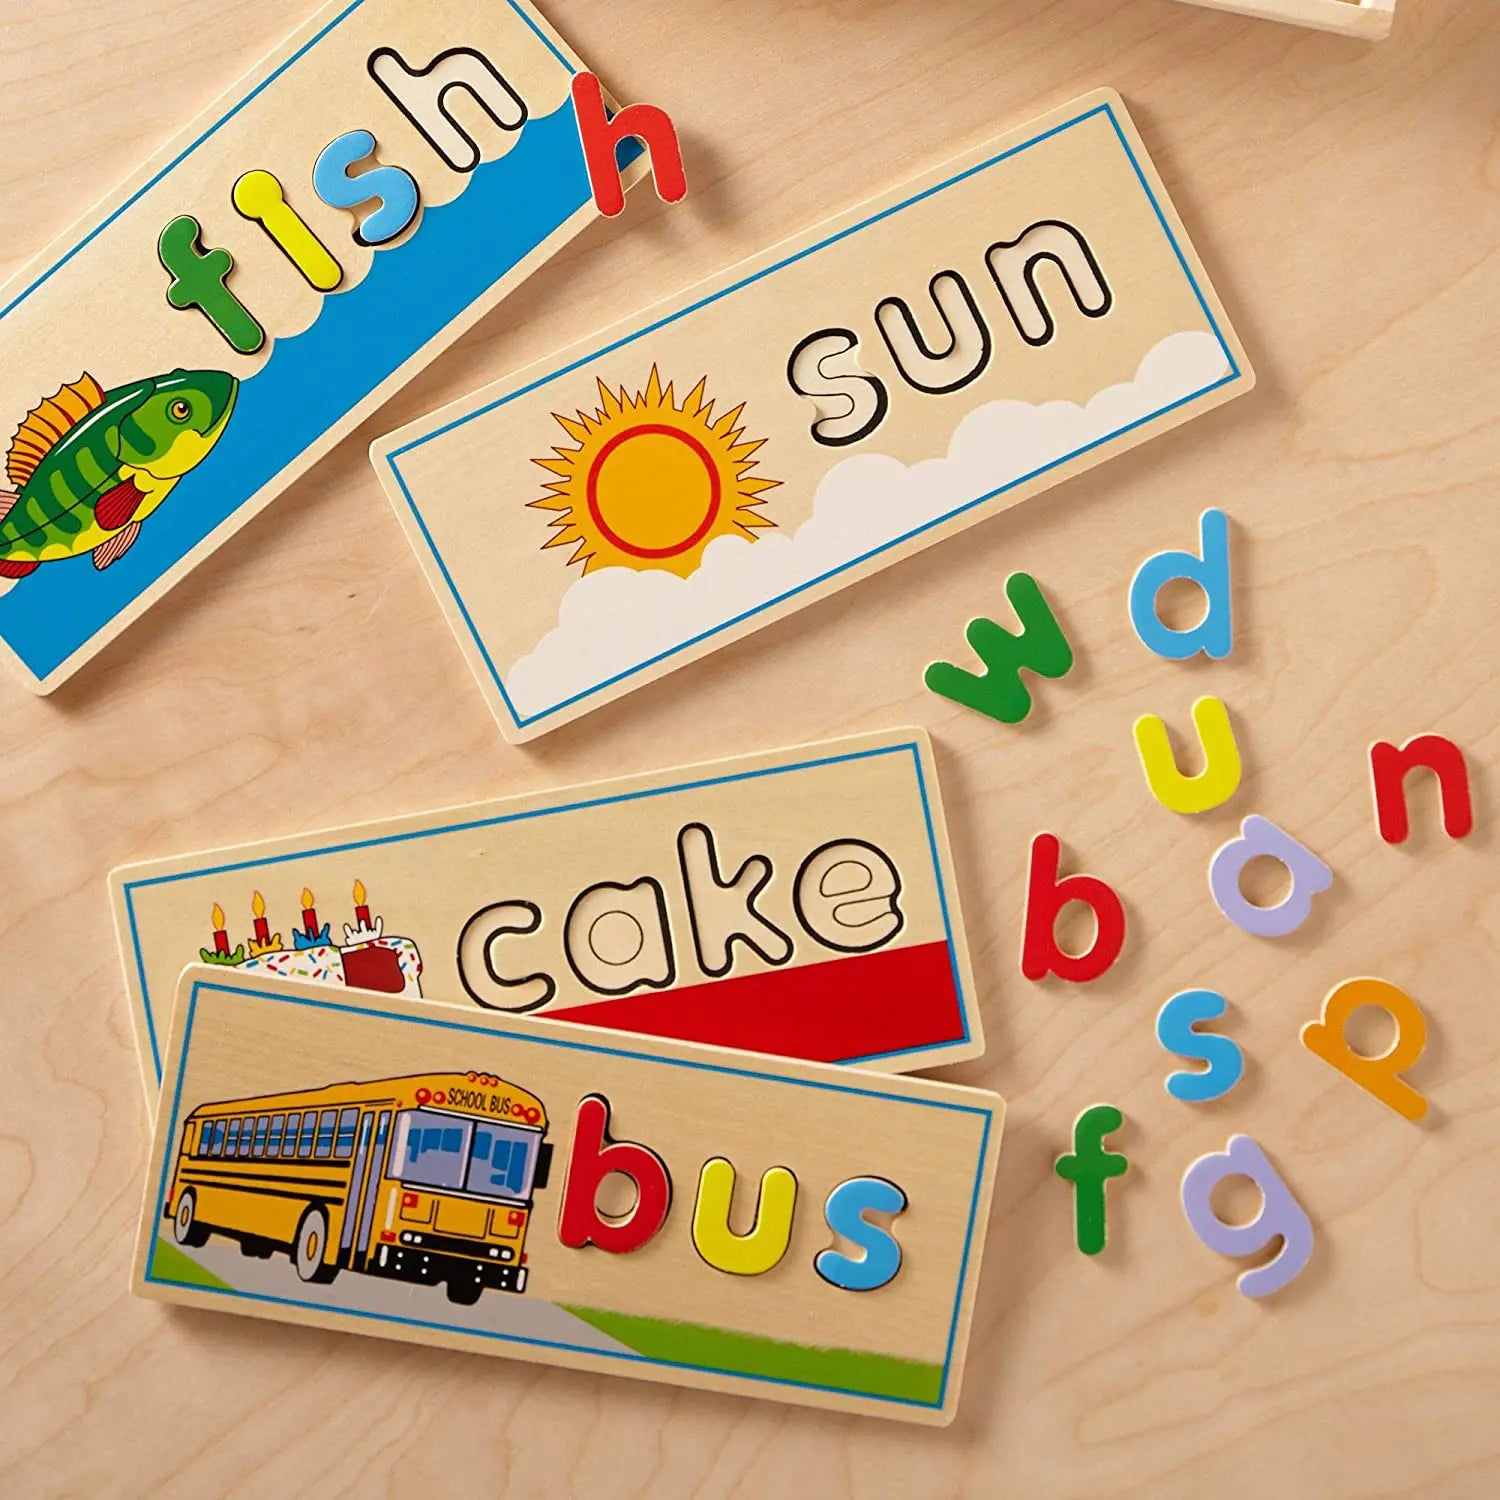 Melissa and Doug wooden set see and spell